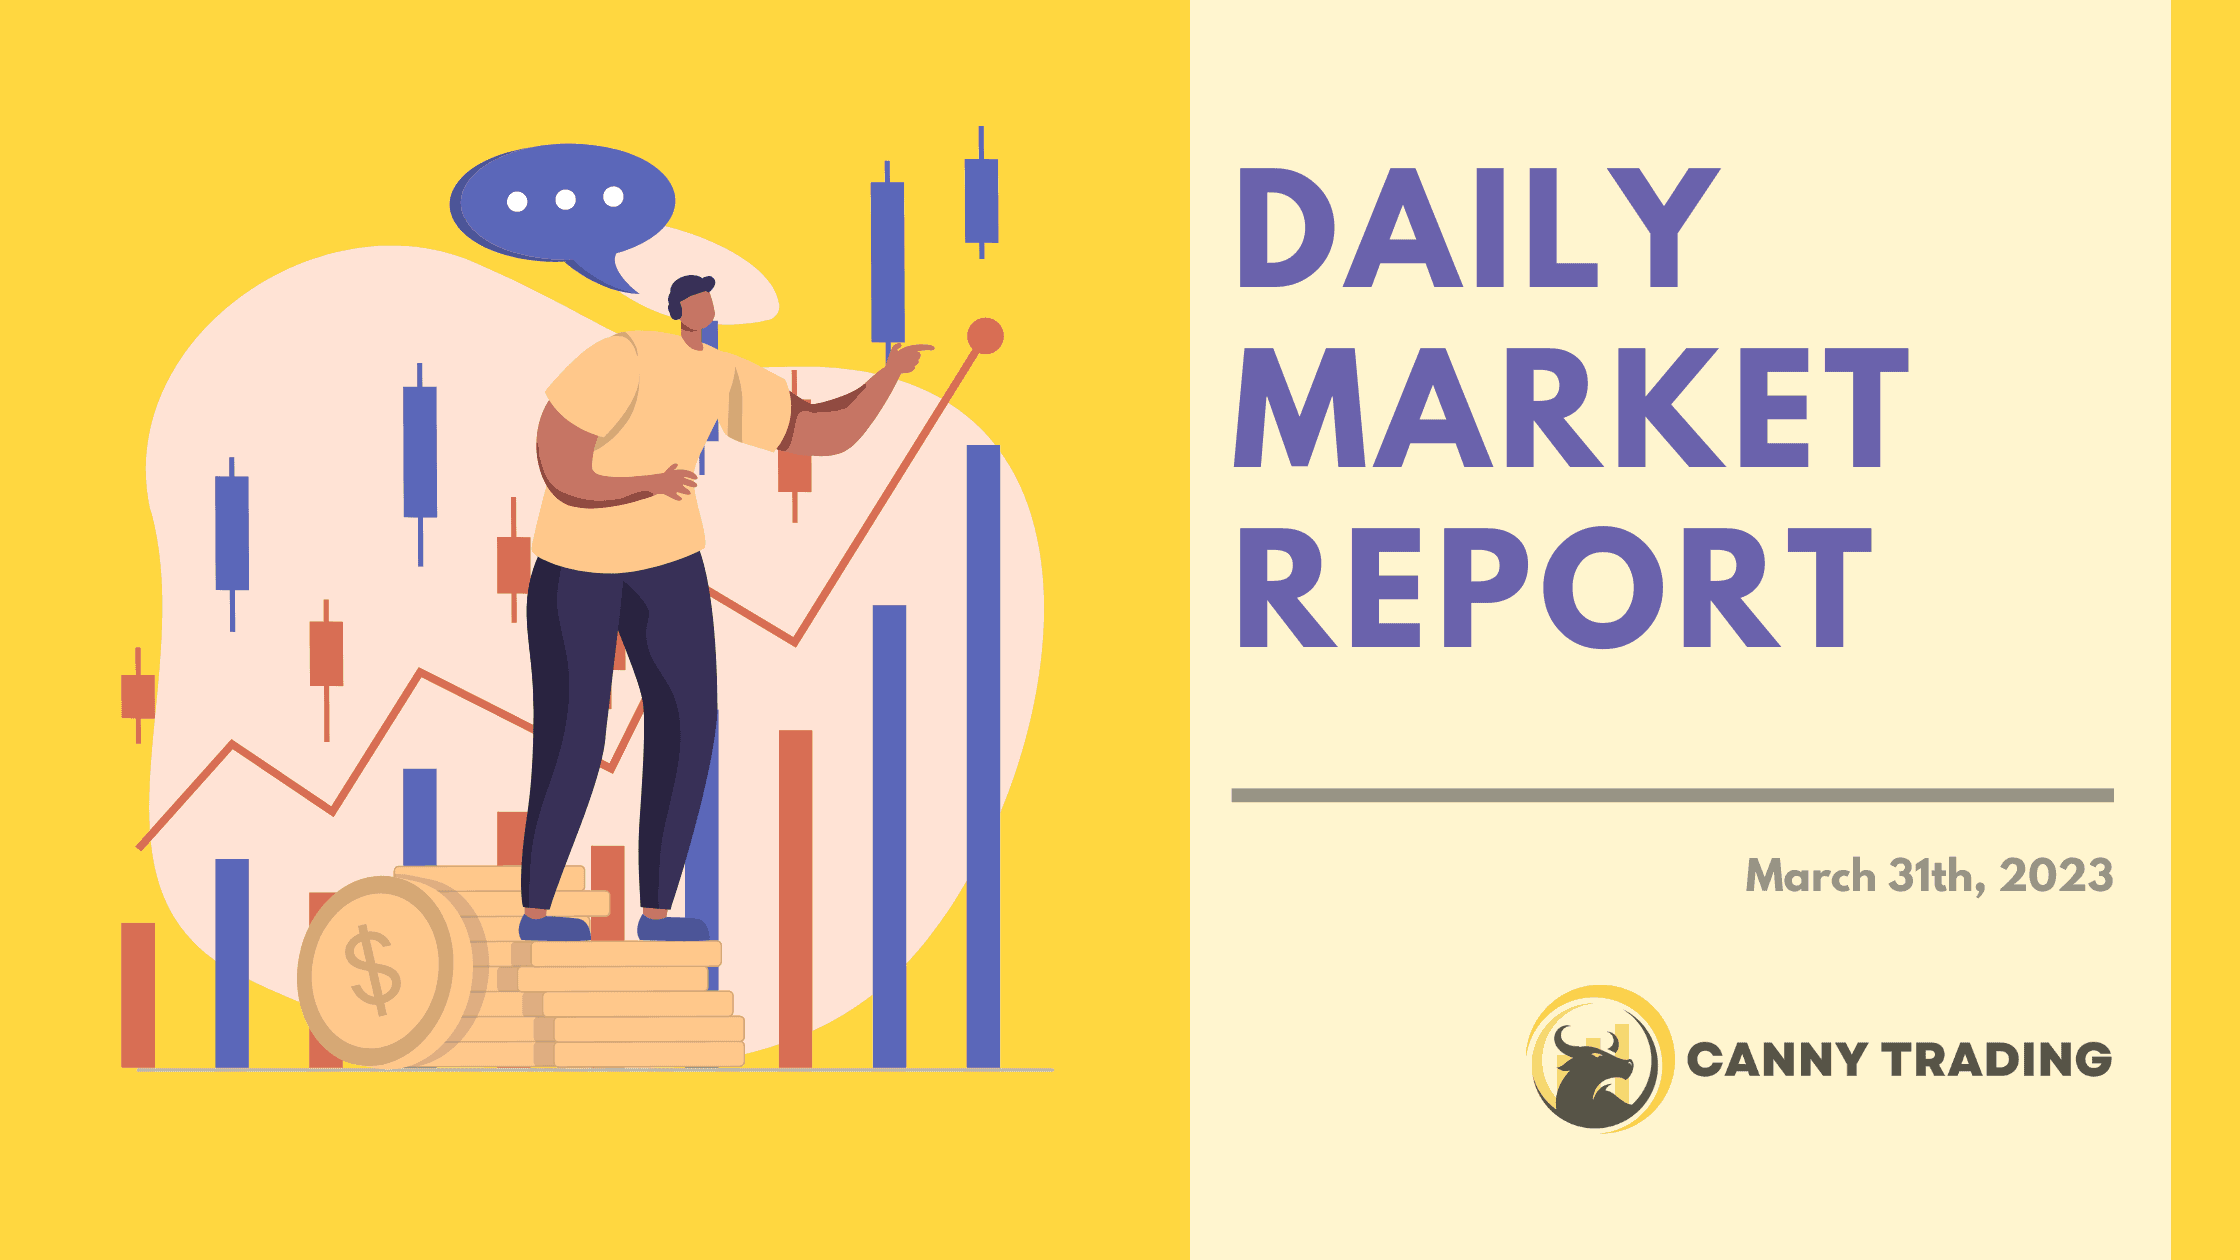 Daily Market Report March 31, 2023